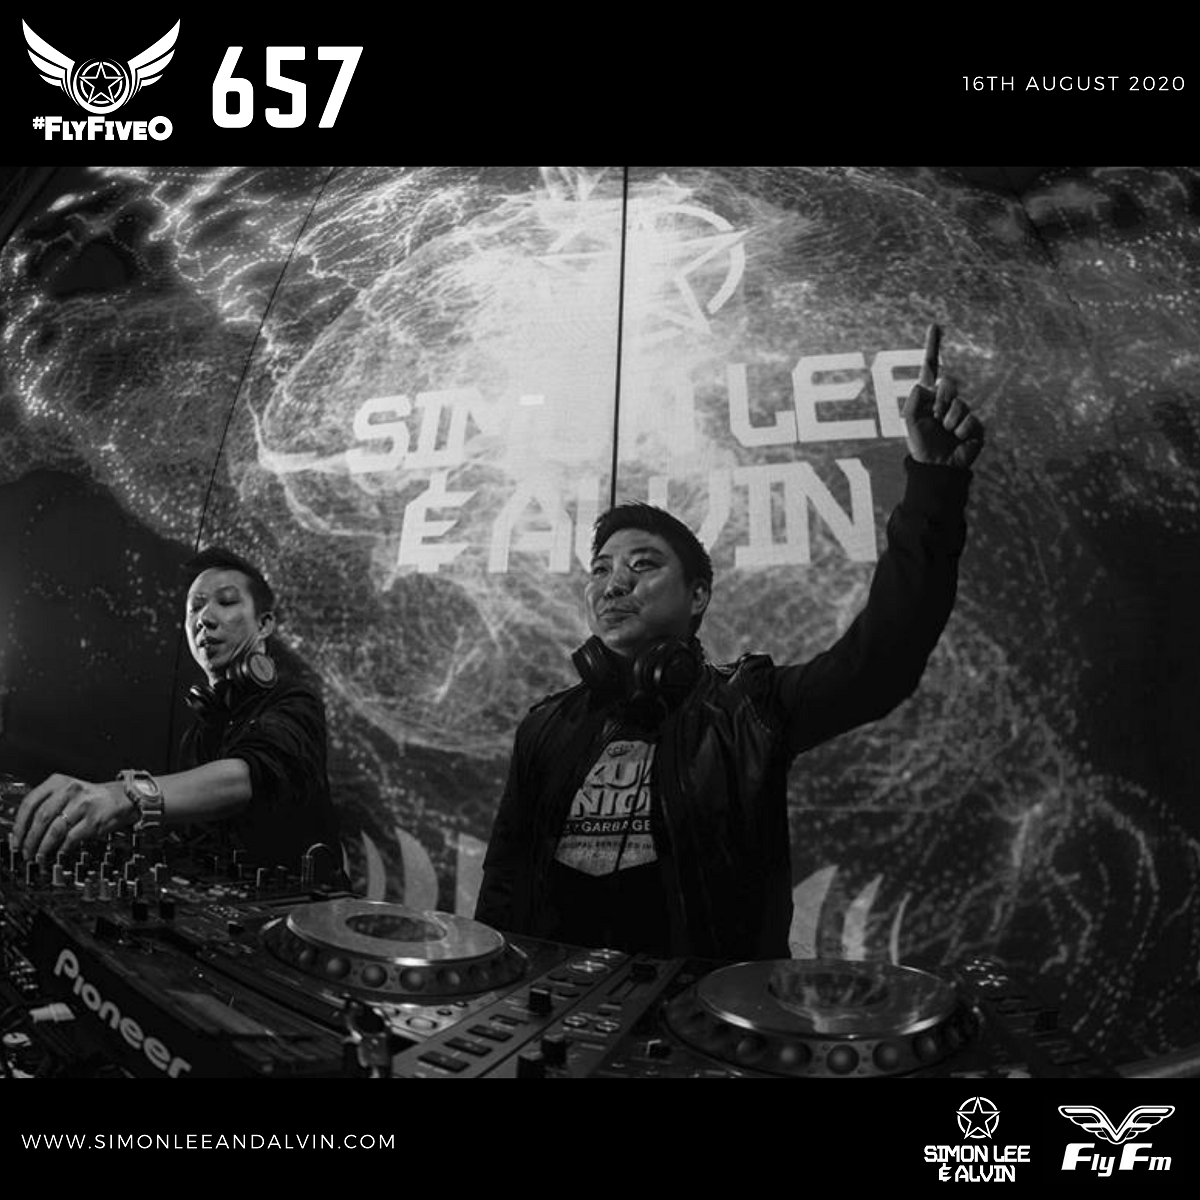 [TONIGHT - 12AM - LIVE] All new episode FLY FM #FlyFiveO #657 feat new releases from @LinneyOfficial @Davidgravell @itsMikeSanders @FerryTayle @fariusmusic @kiranmsajeev @Eximinds @Tritonal + many more! Tune in live and join the chat ▶ youtu.be/vqTx9b6E1K8